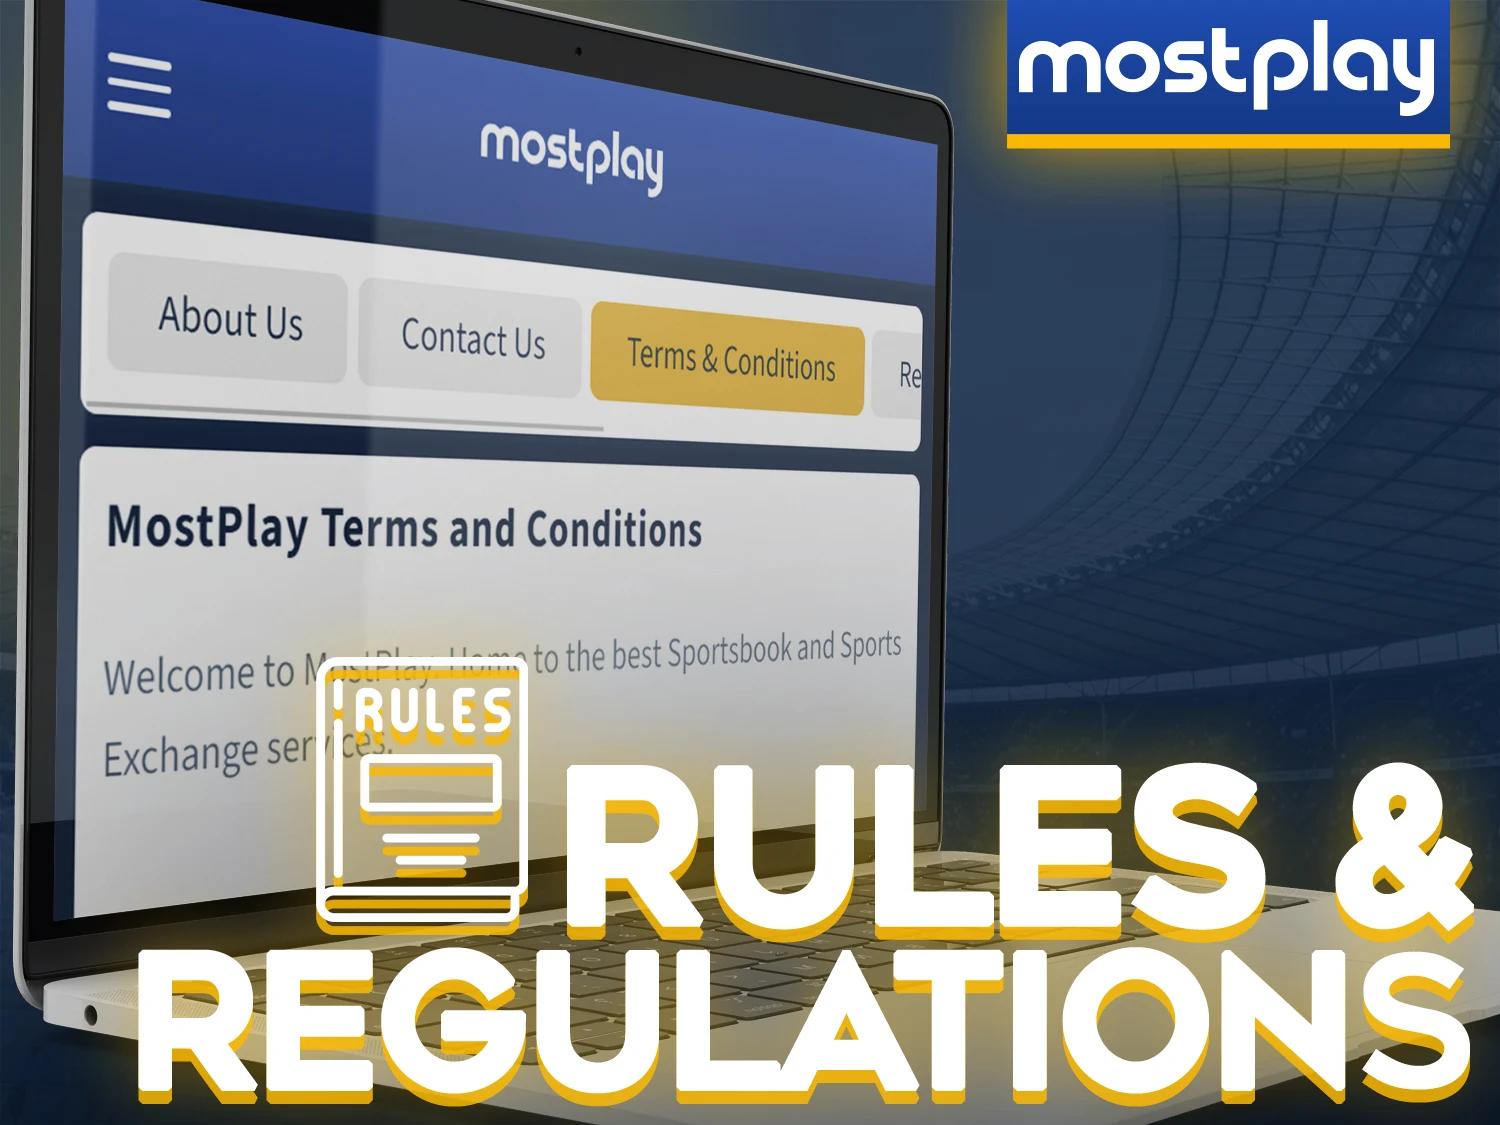 Follow the Mostplay rules when you bet and play at the casino.